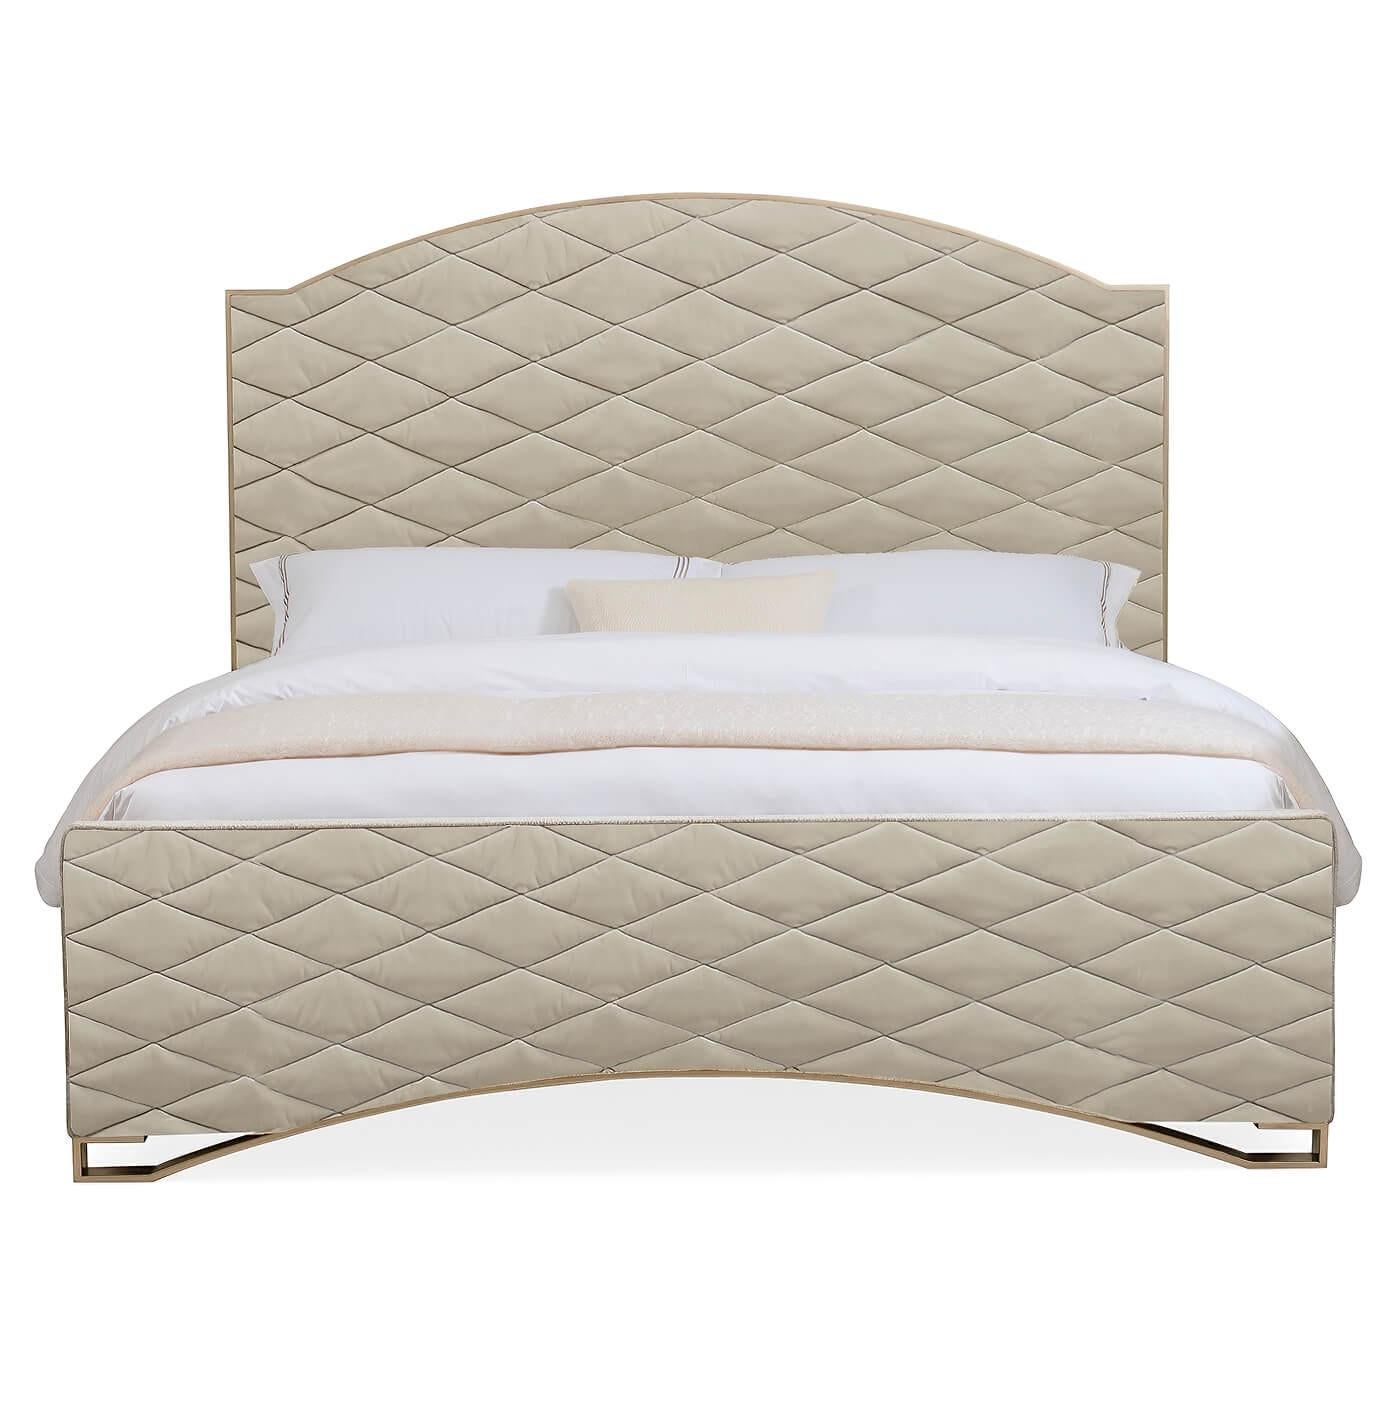 A Hollywood Regency style King size bed. This dramatic design features a quilted upholstered headboard and footboard. The tall, softly rounded headboard is trimmed in wood and finished with a golden shimmer painted finish while the bottom of the